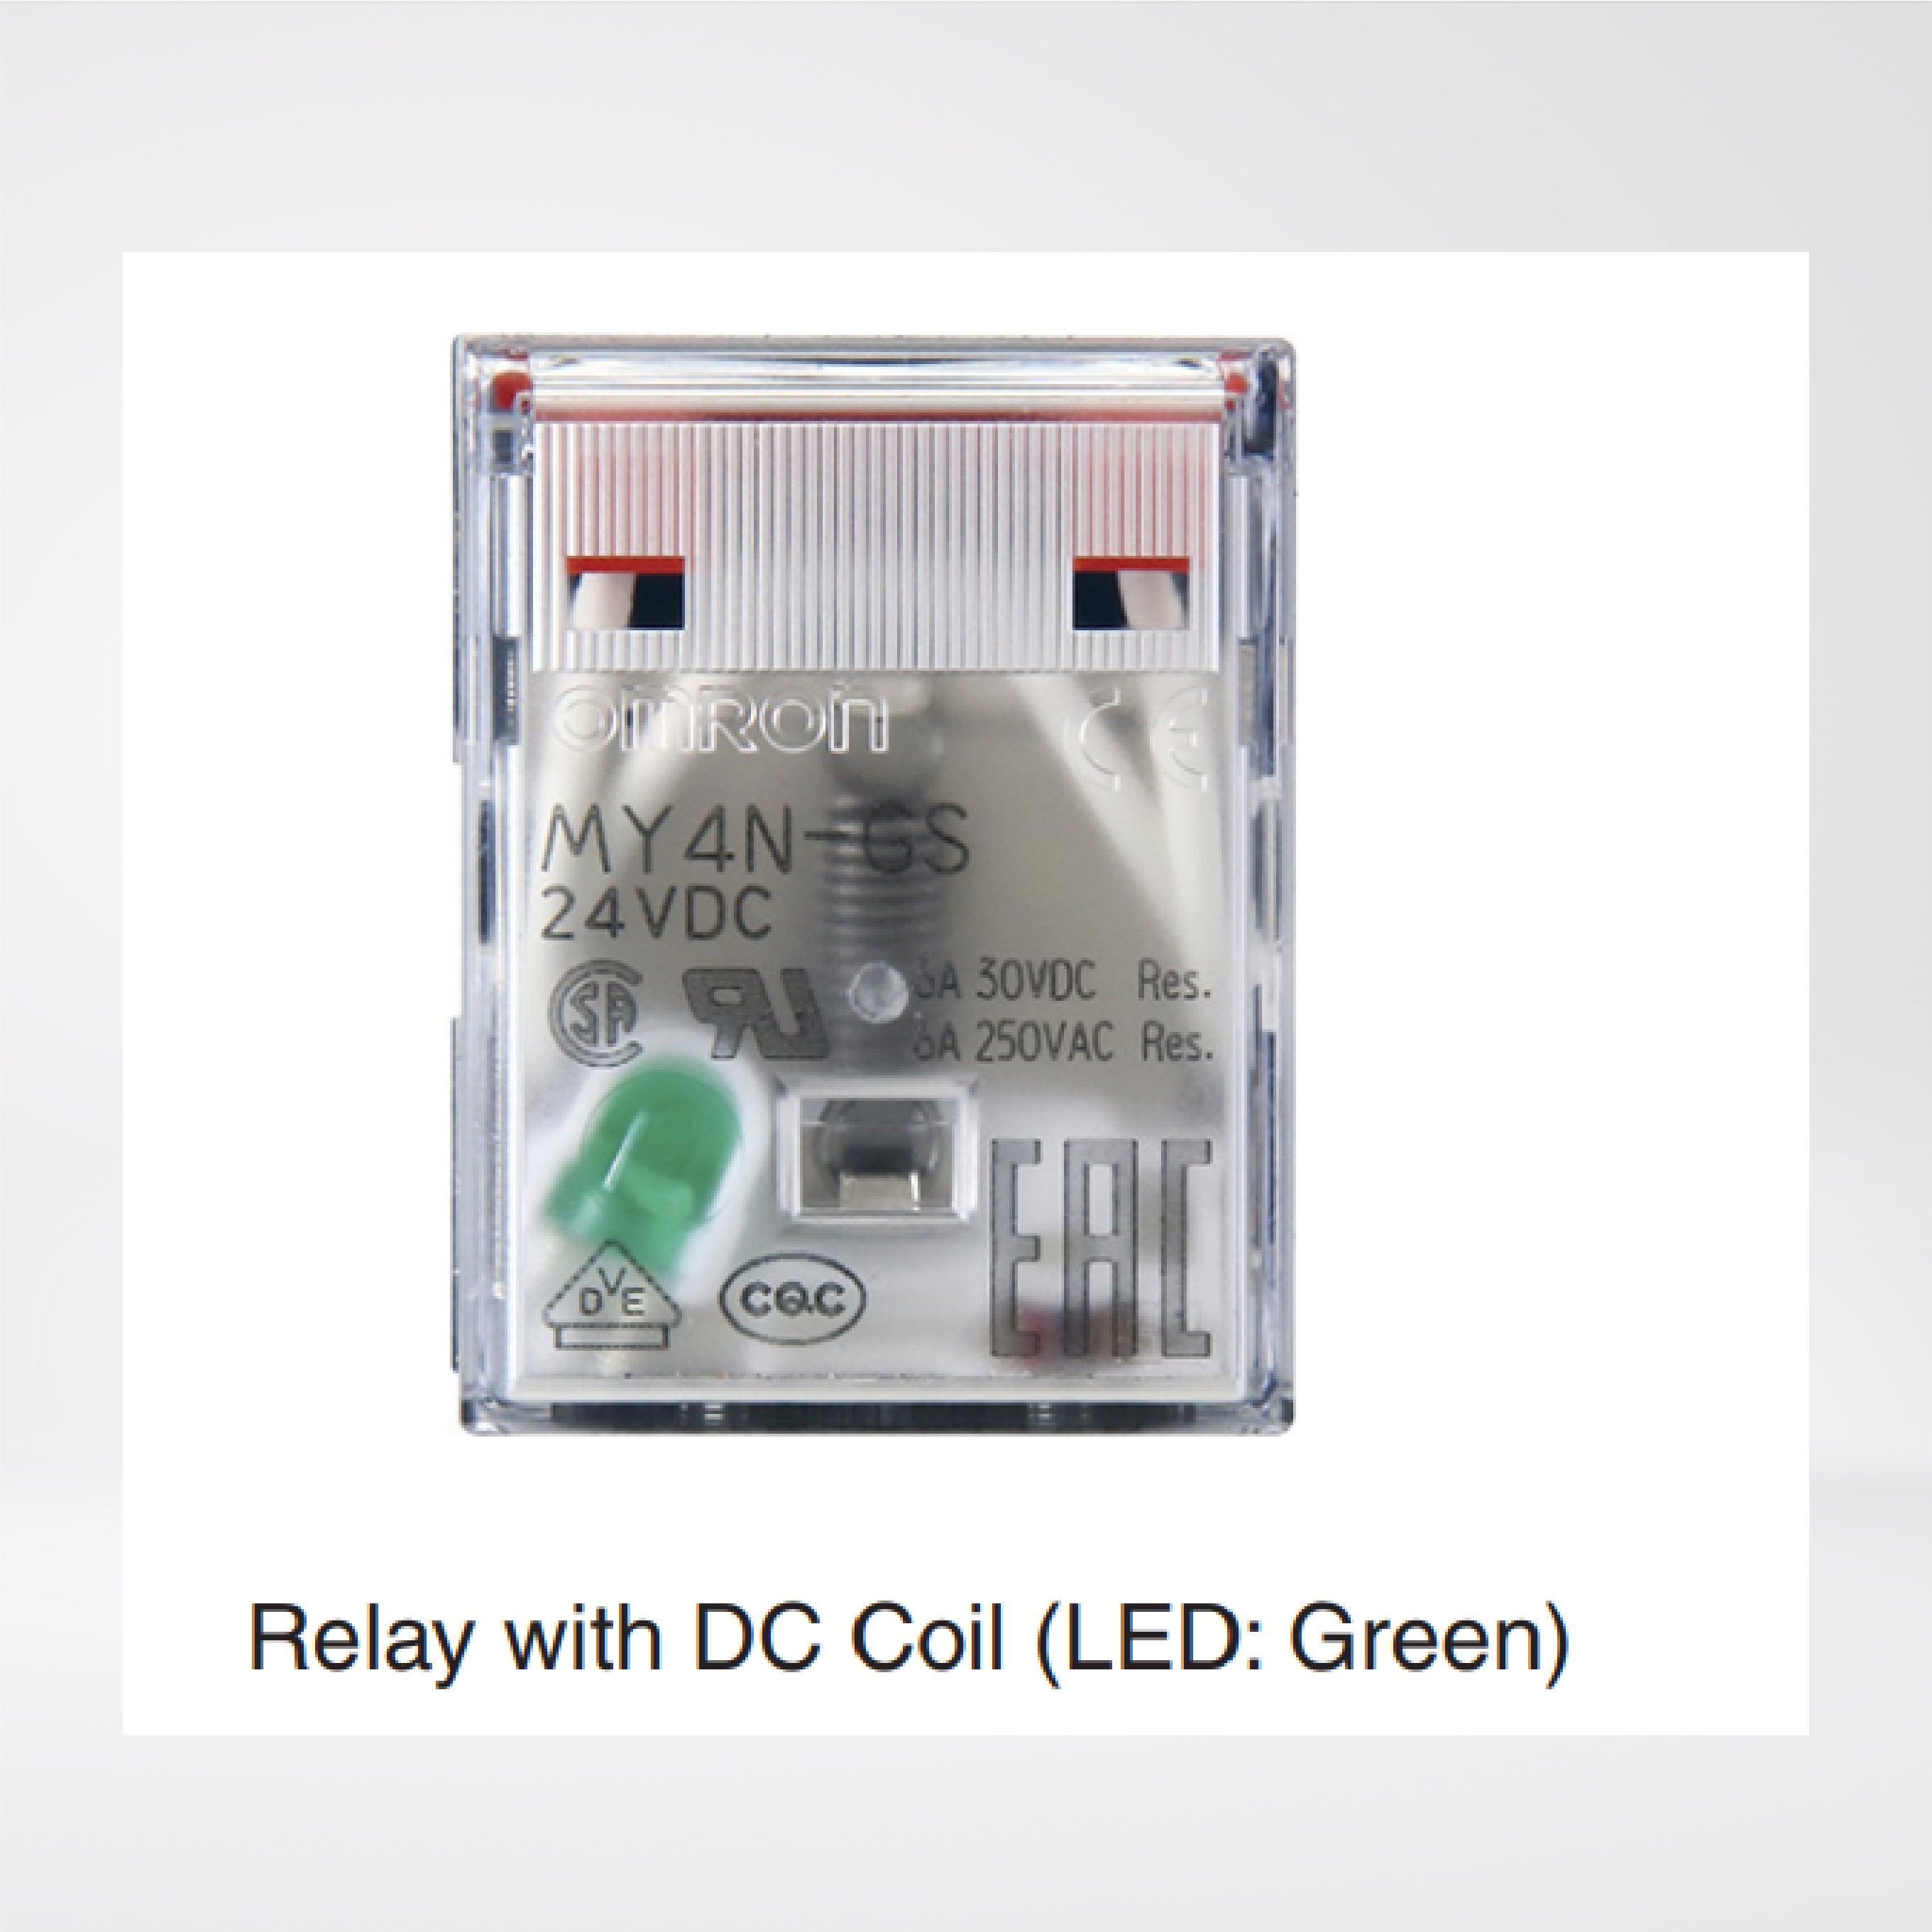 MY2N-GS DC12 BY OMZ Relay, plug-in, 8-pin, DPDT, 7 A, mechanical & LED indicators, 12 VDC - Riverplus